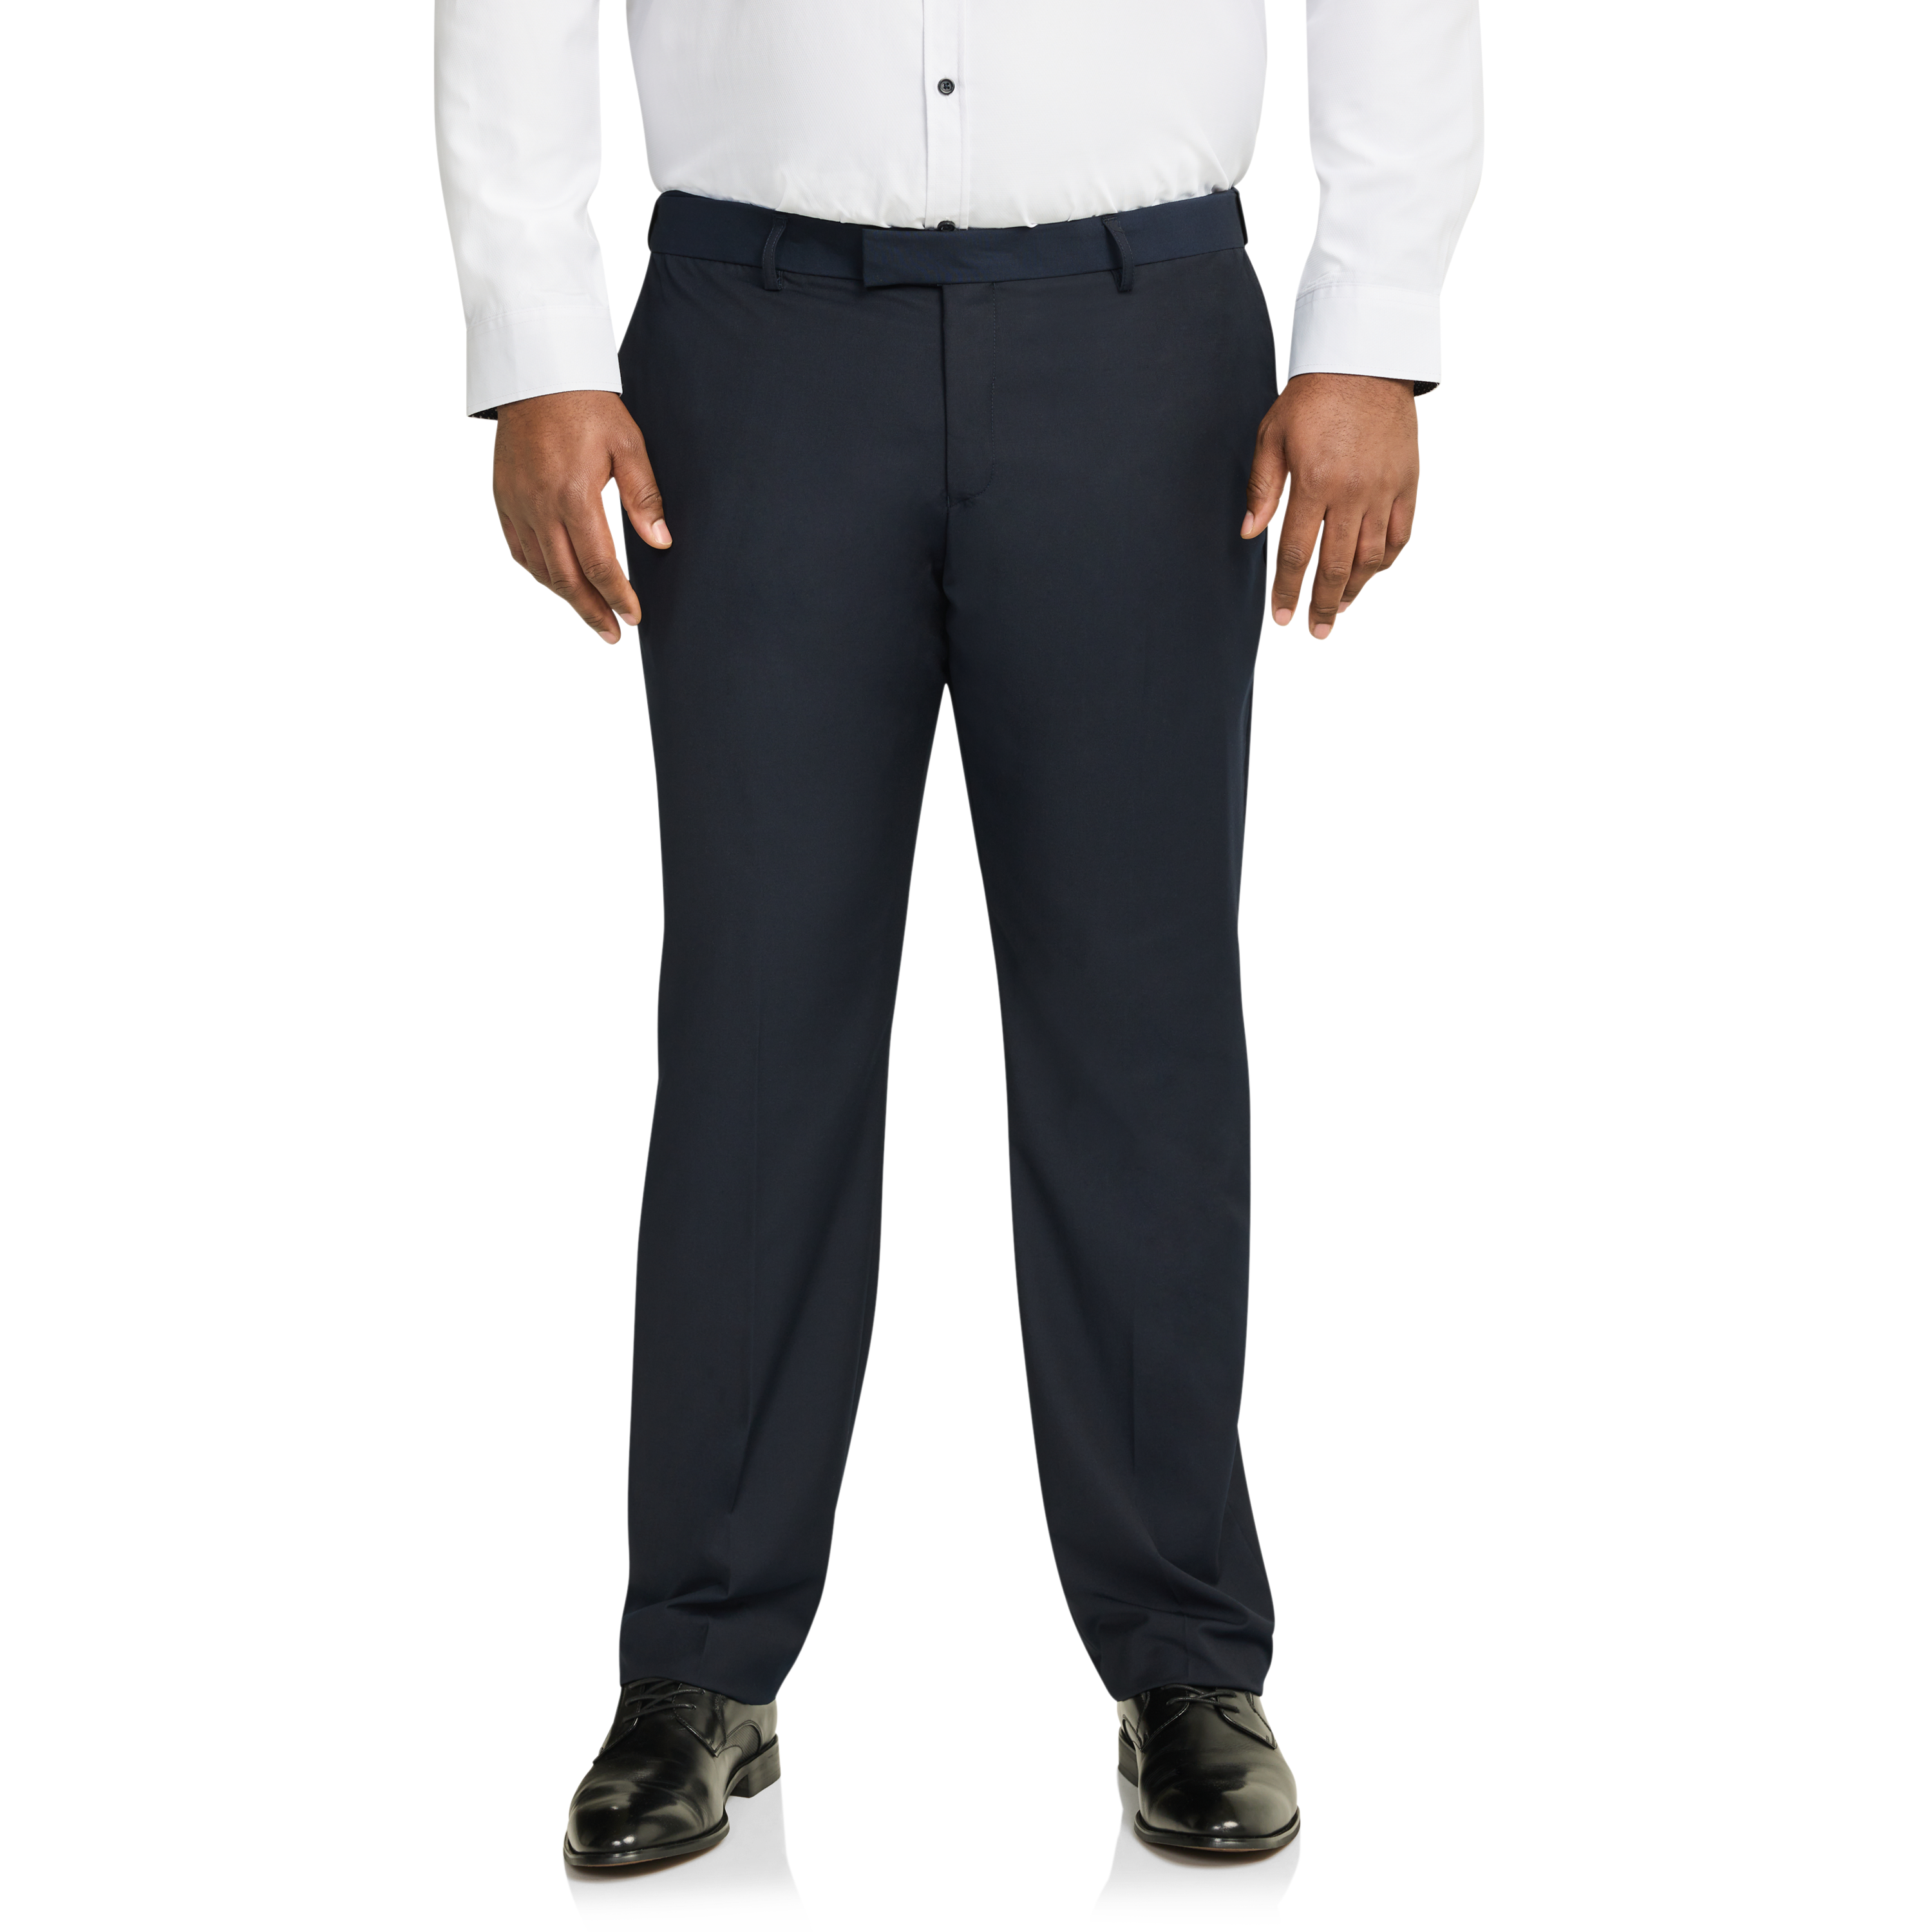 Experience the ultimate in comfort and style with the INFINITI Mens Plaid Slim  Stretch Dress Pants These slim fit pants adorned with a  Instagram